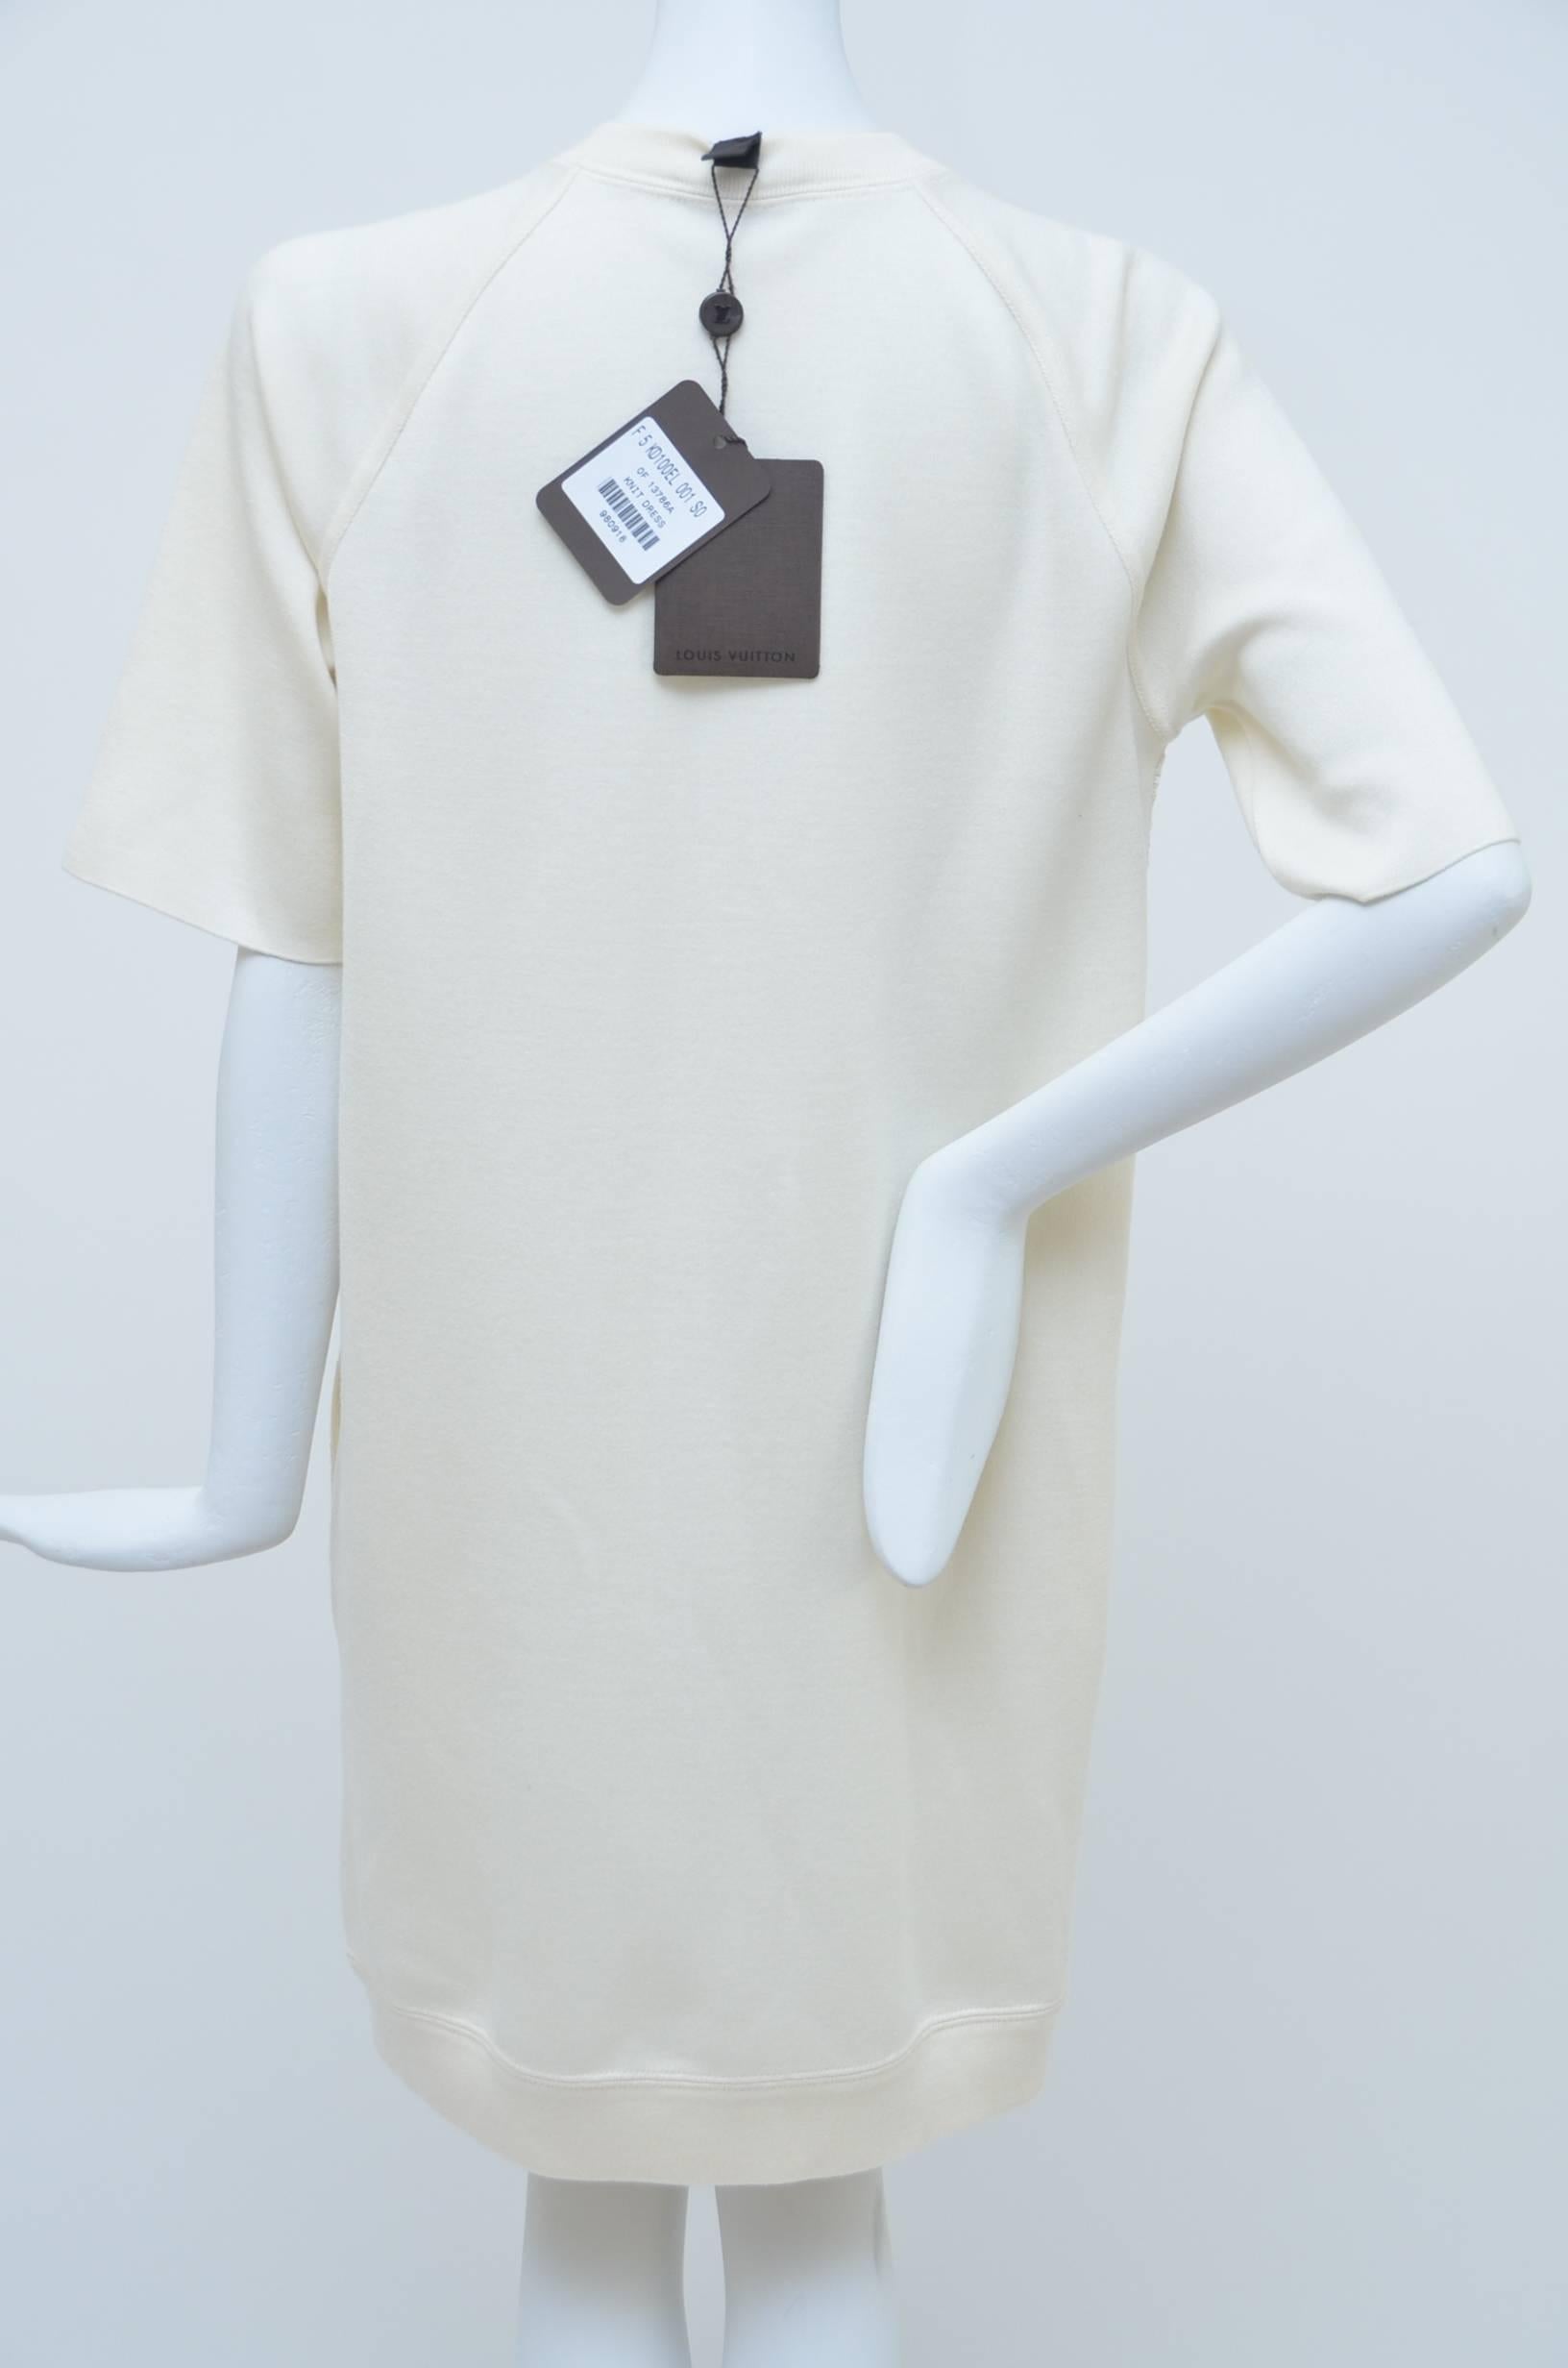 Louis Vuitton sequence off white dress.
New with tags.Size S.
2 pockets on the side.
Approximate measurements: waist 18